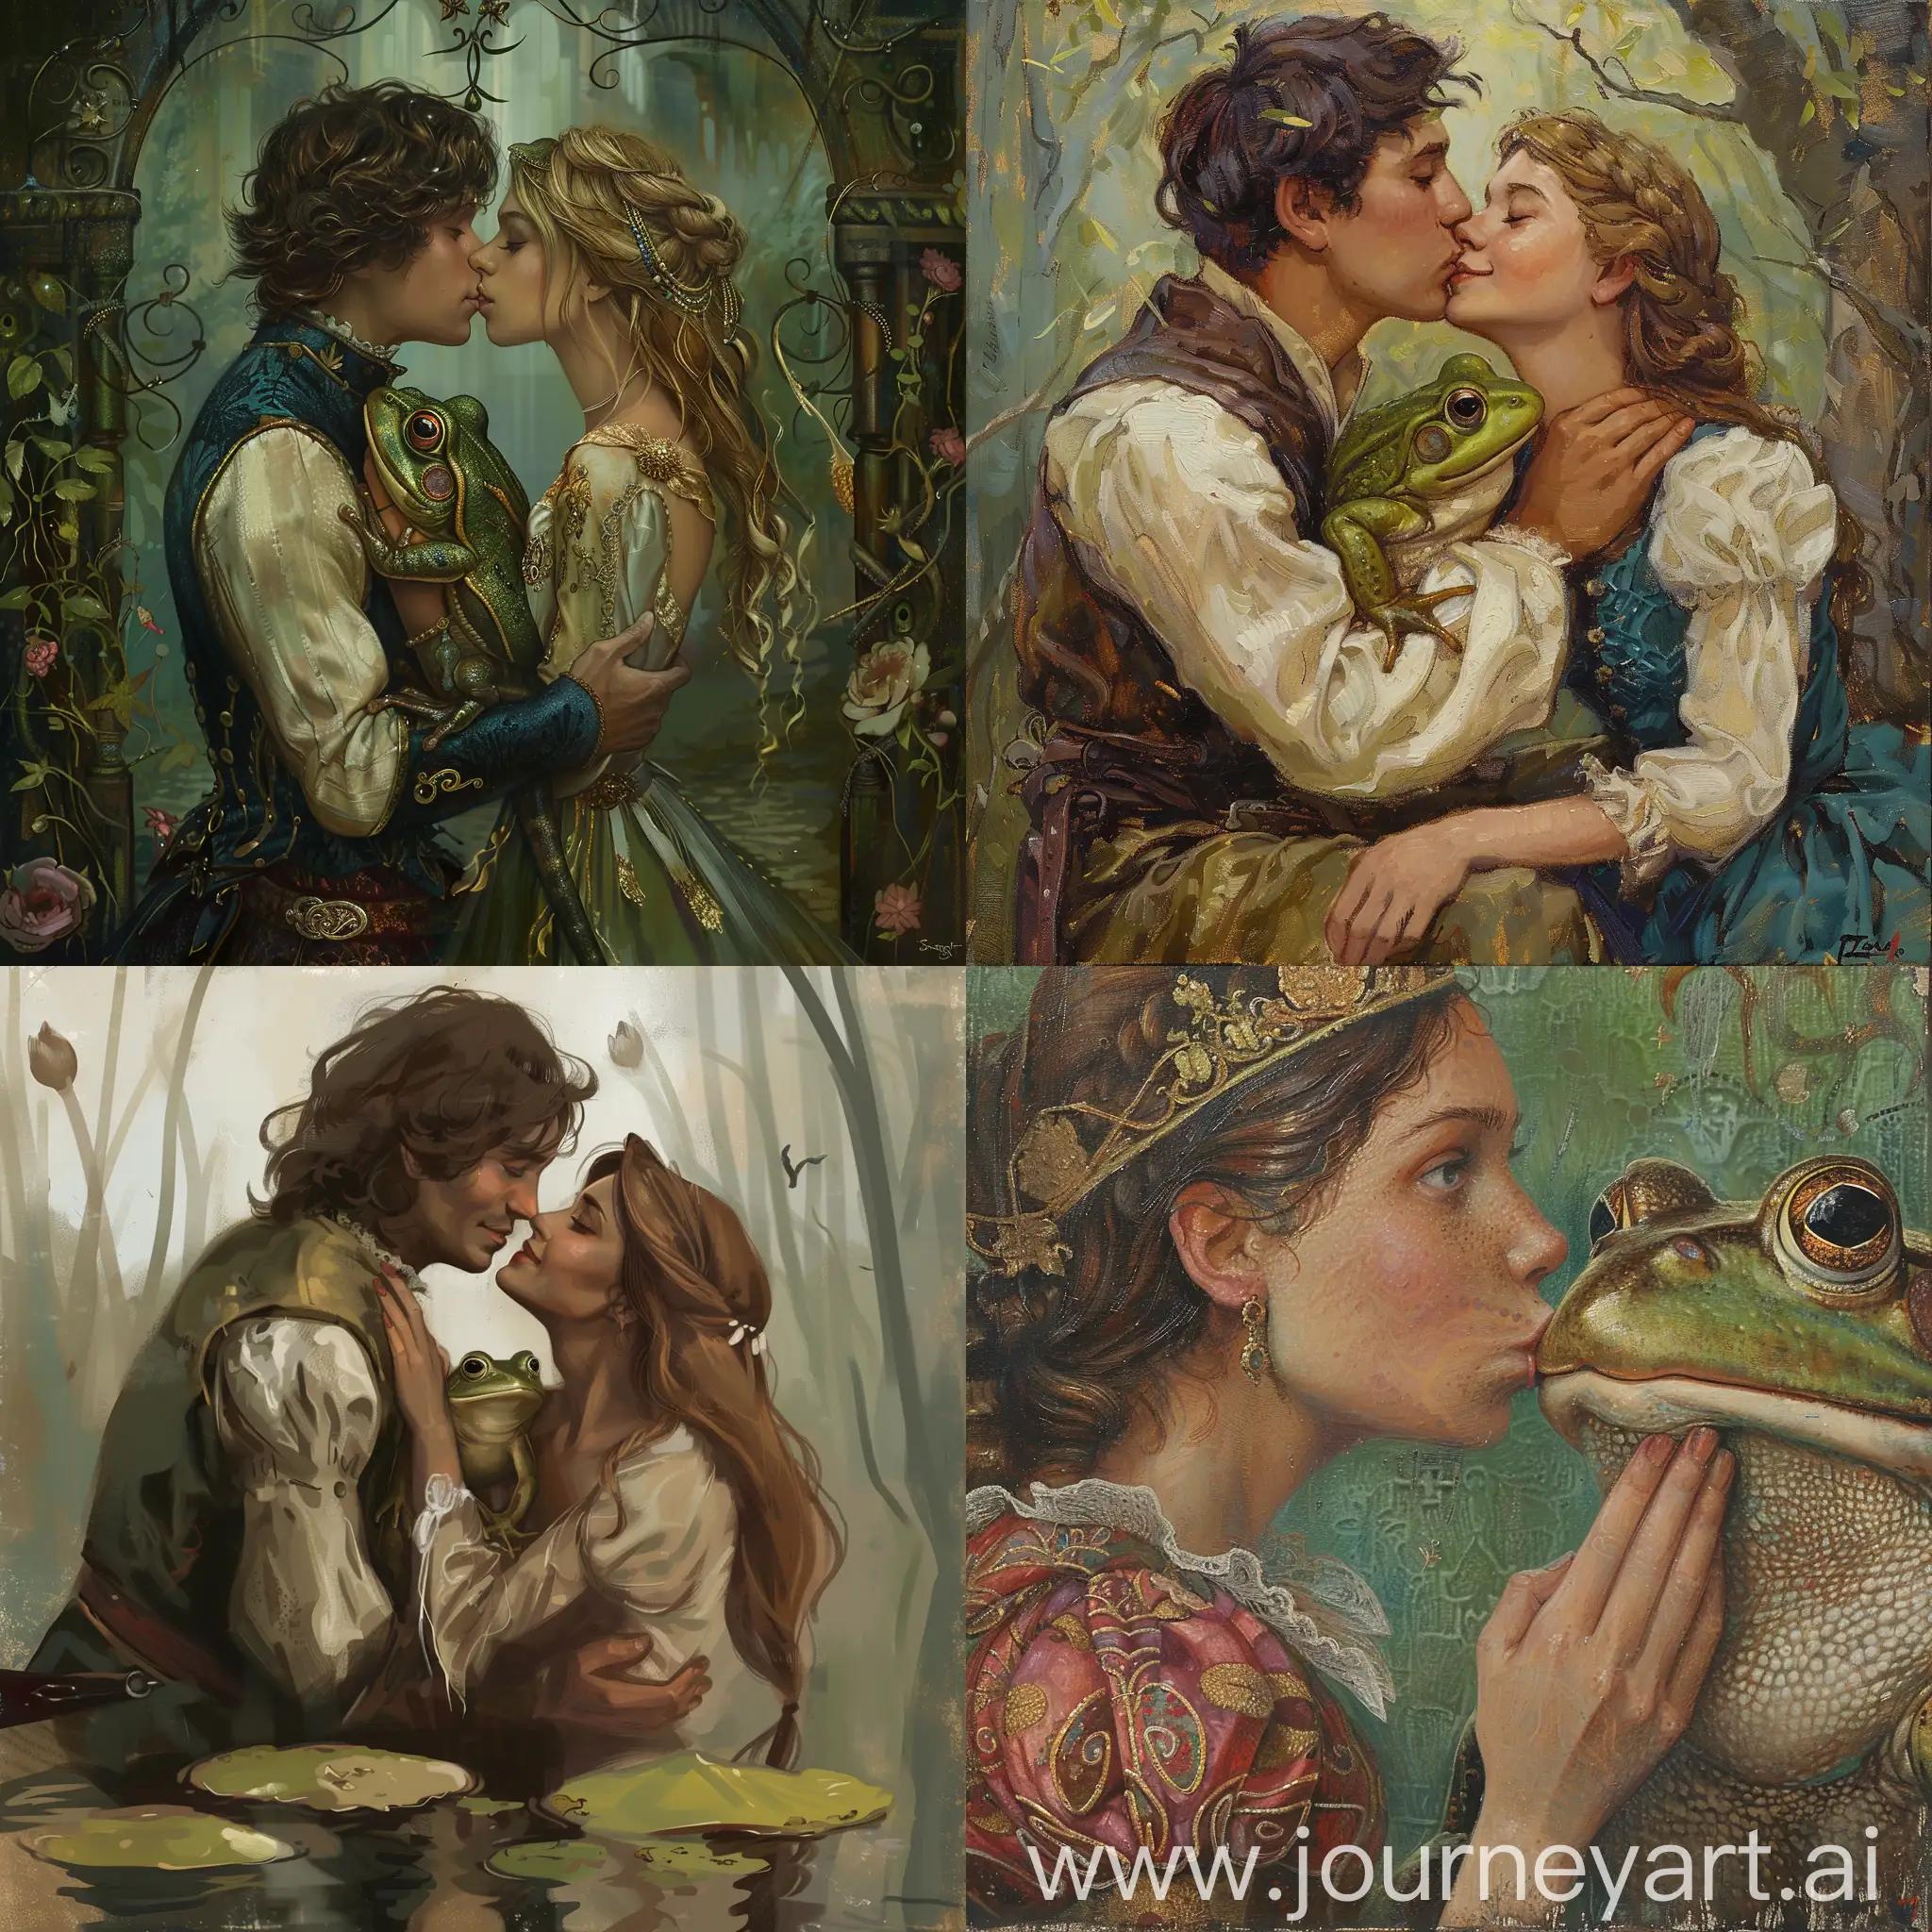 Ivan kissed the frog and, suddenly, the Princess was in front of him. Ivan hides a frog in his pocket, but it's too late, I've already seen it.